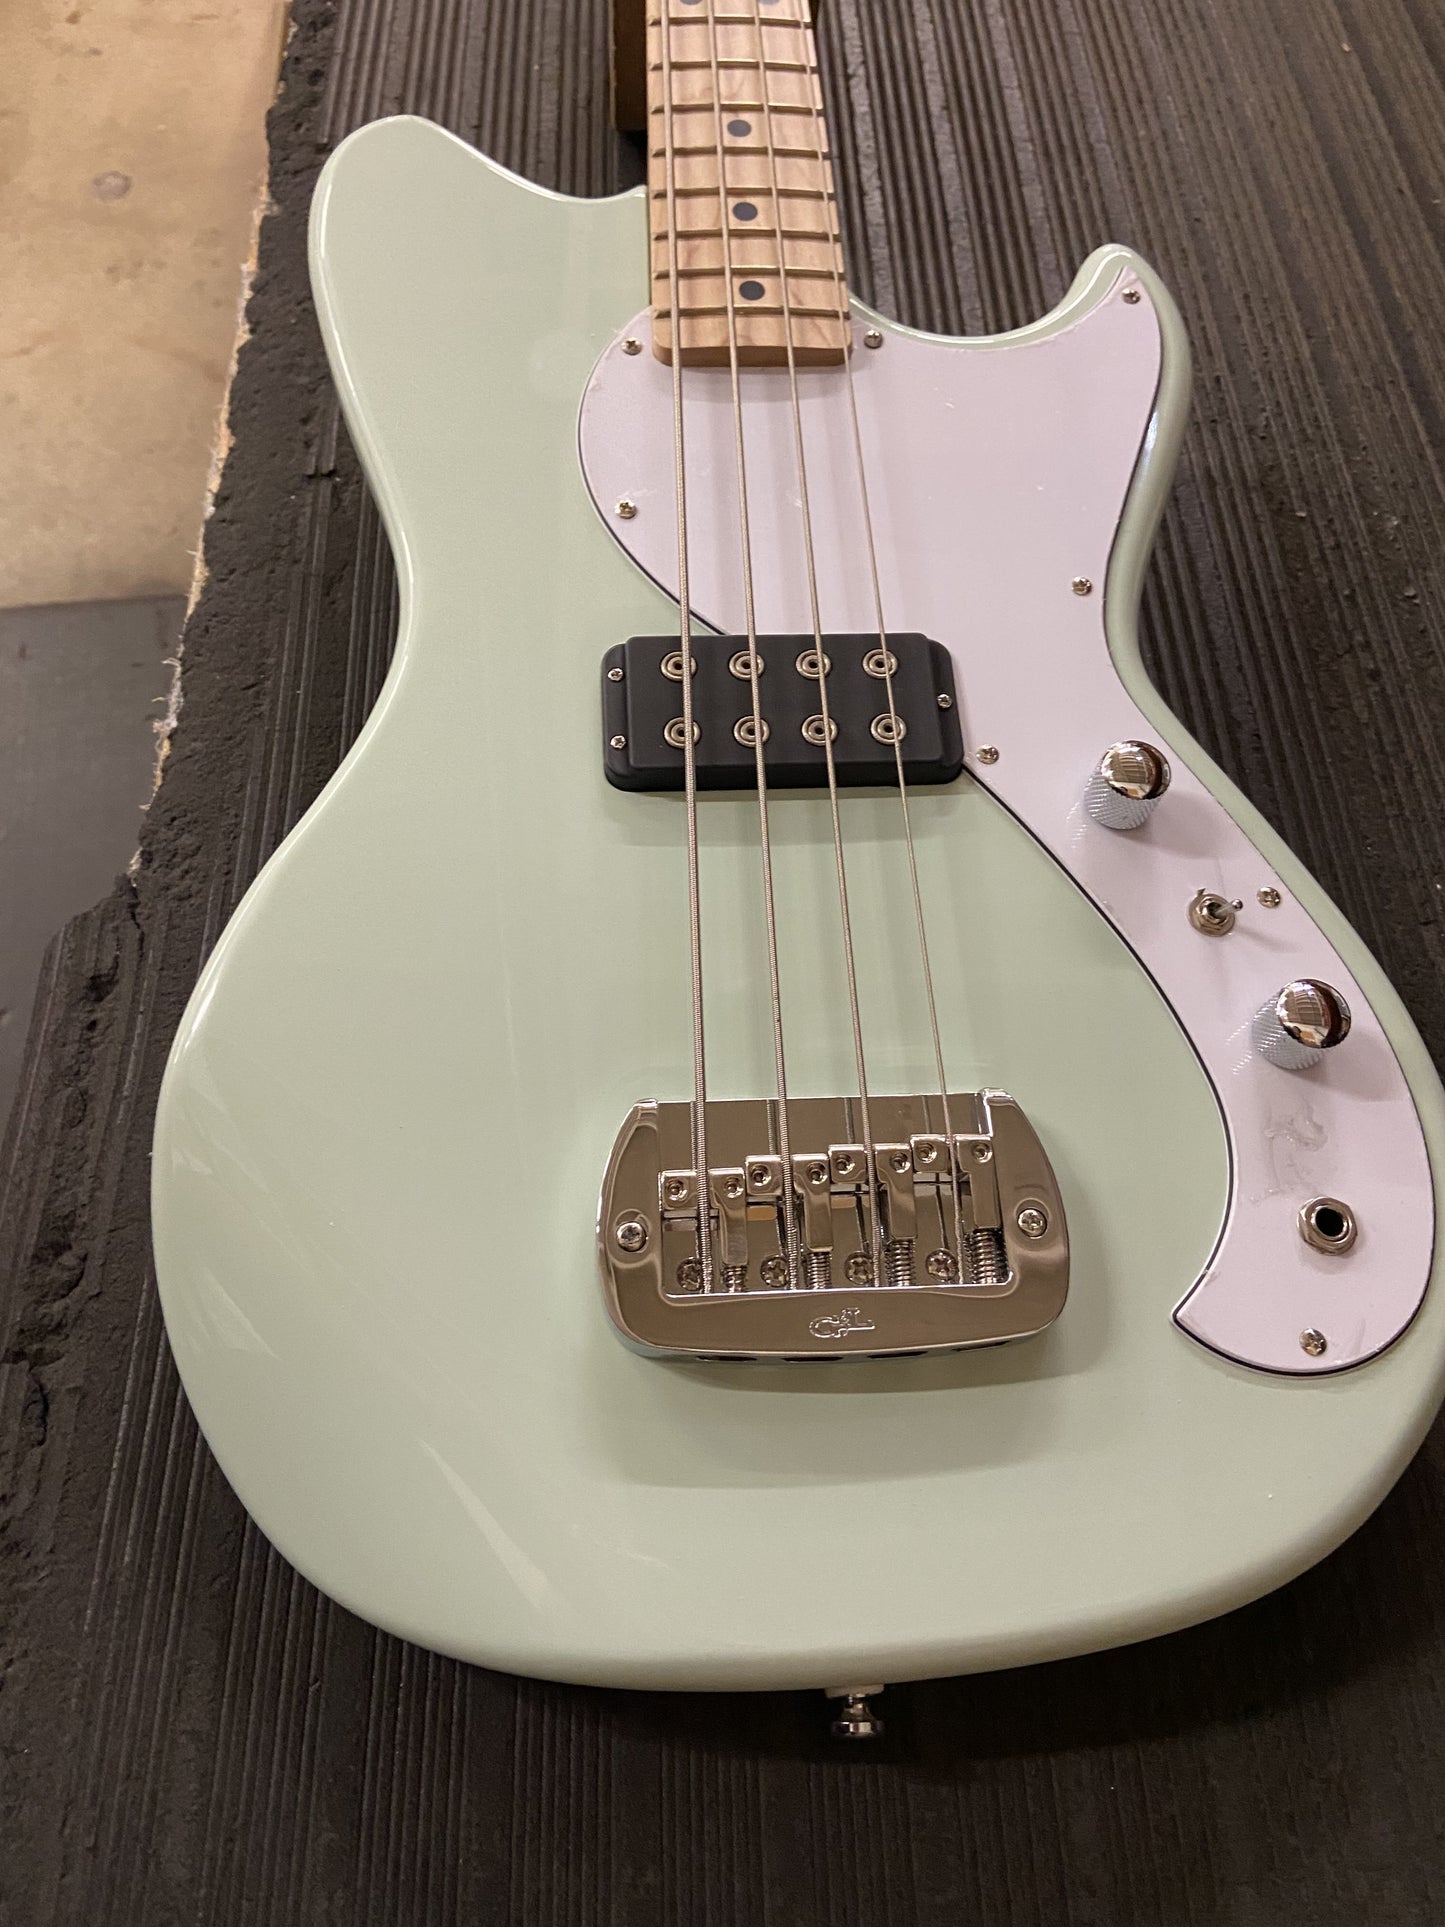 B-Stock Instruments - Tribute Fallout Bass - Surf Green - MP